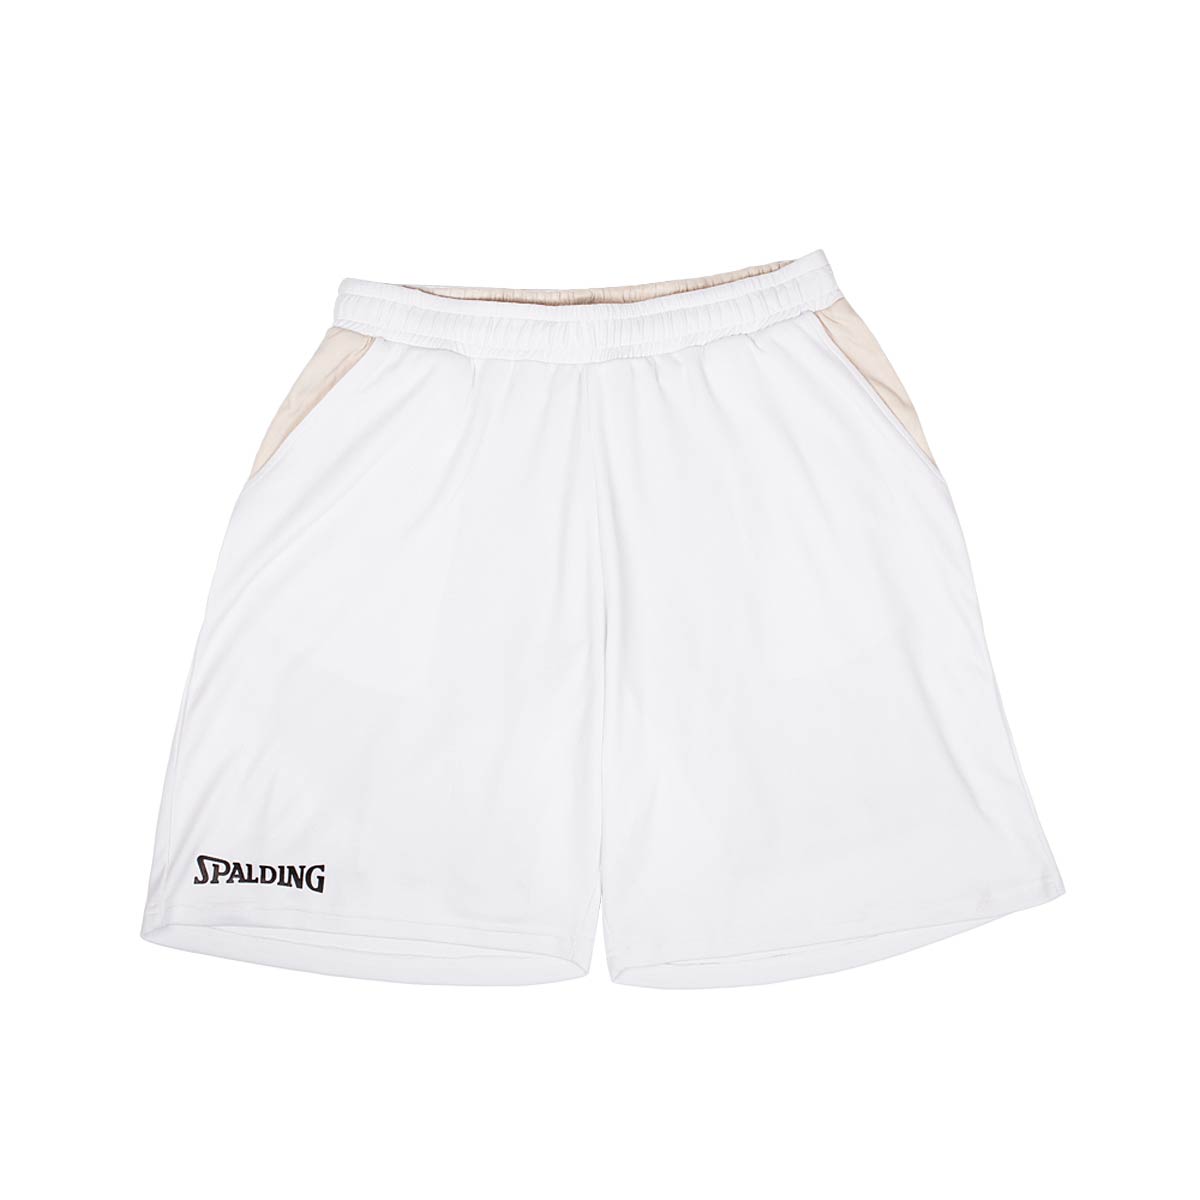 Spalding Active Shorts, White/Silver